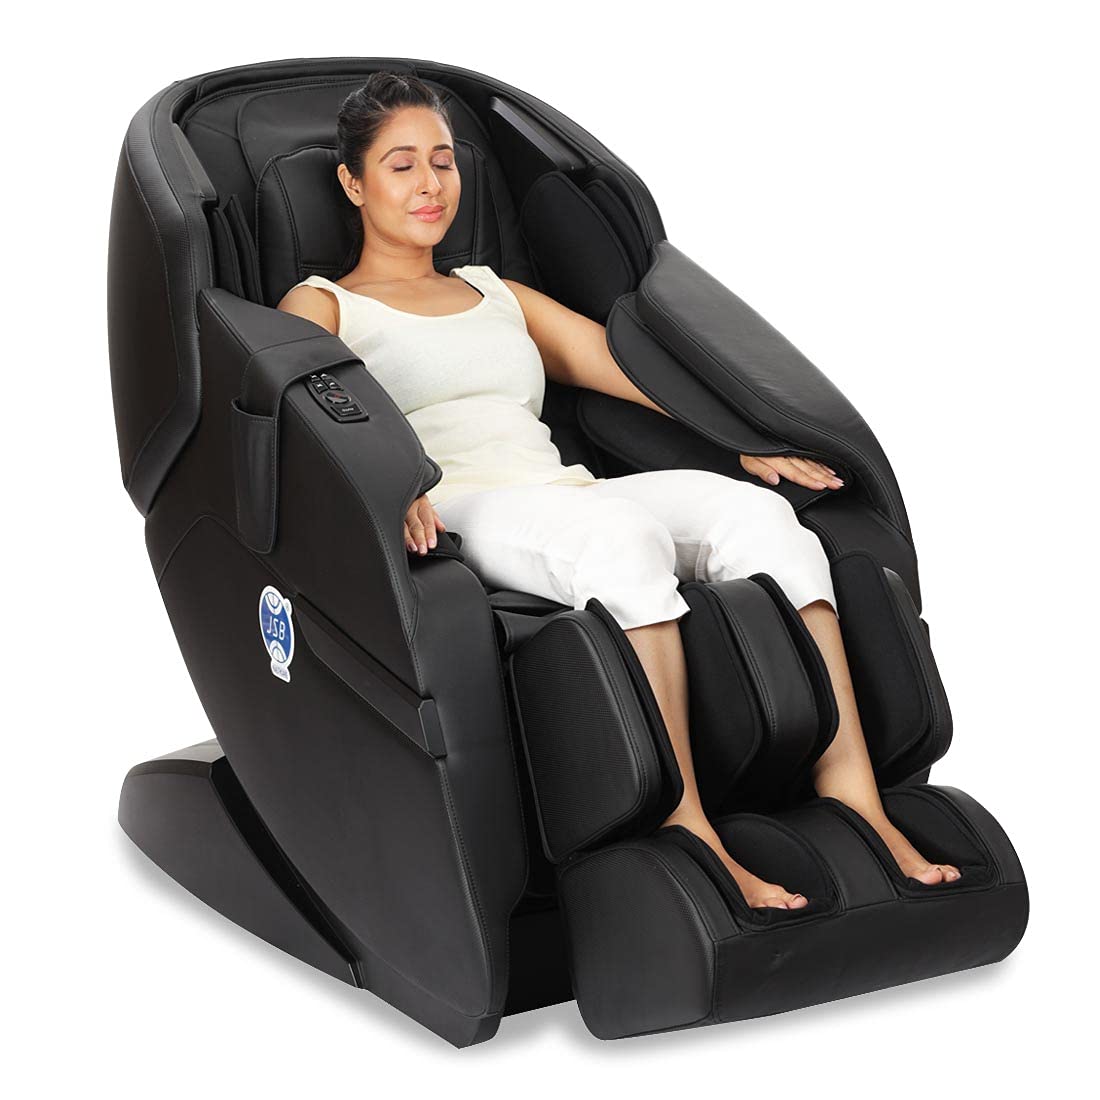 How to Choose the Best Massage Chair for You